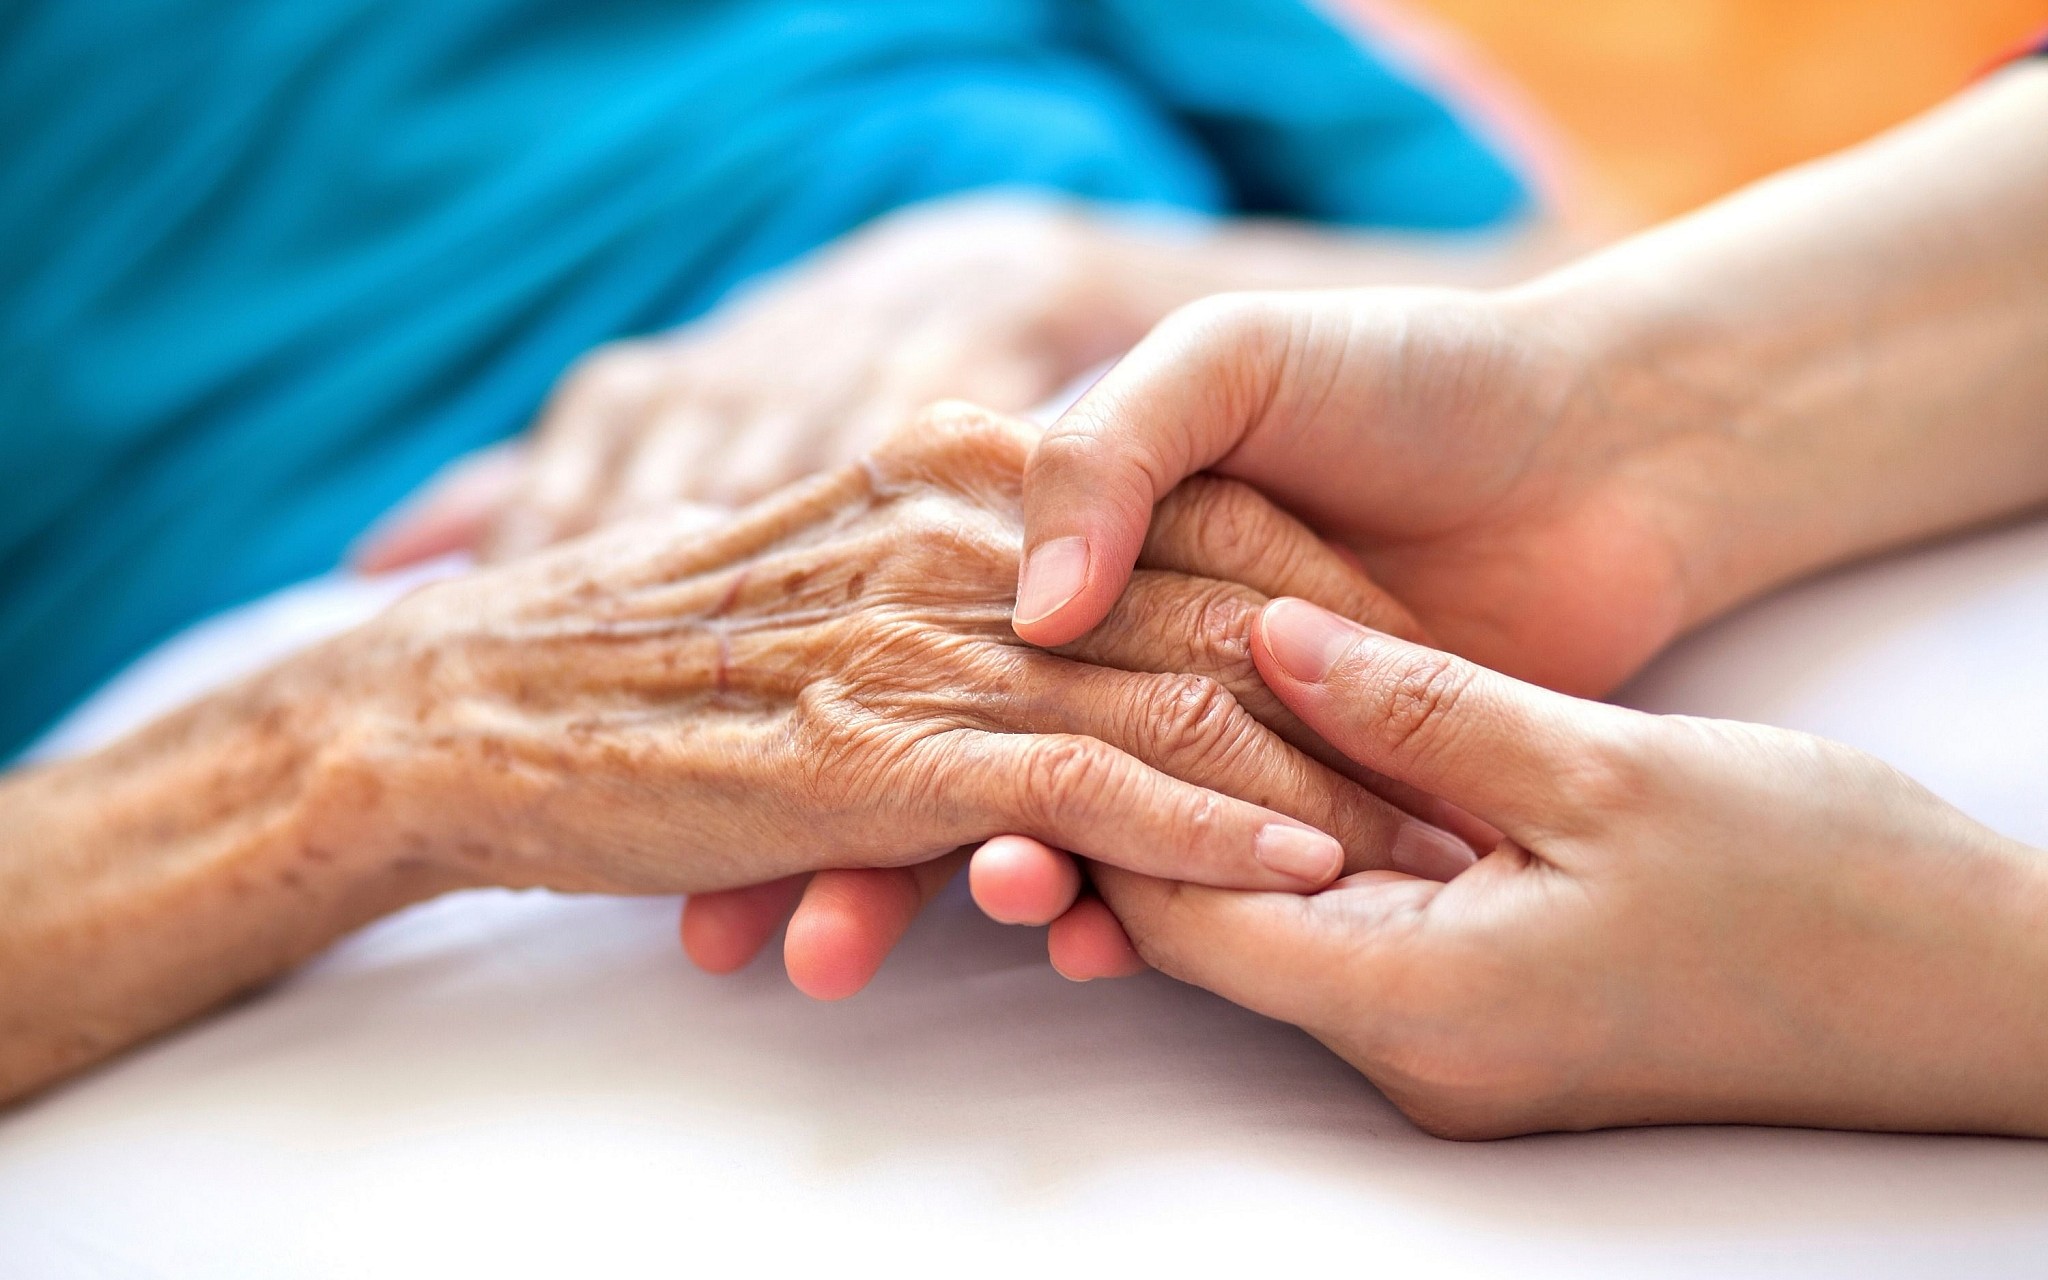 Elderly hands being carefully held by another. Know the signs of elder financial abuse blog post image.